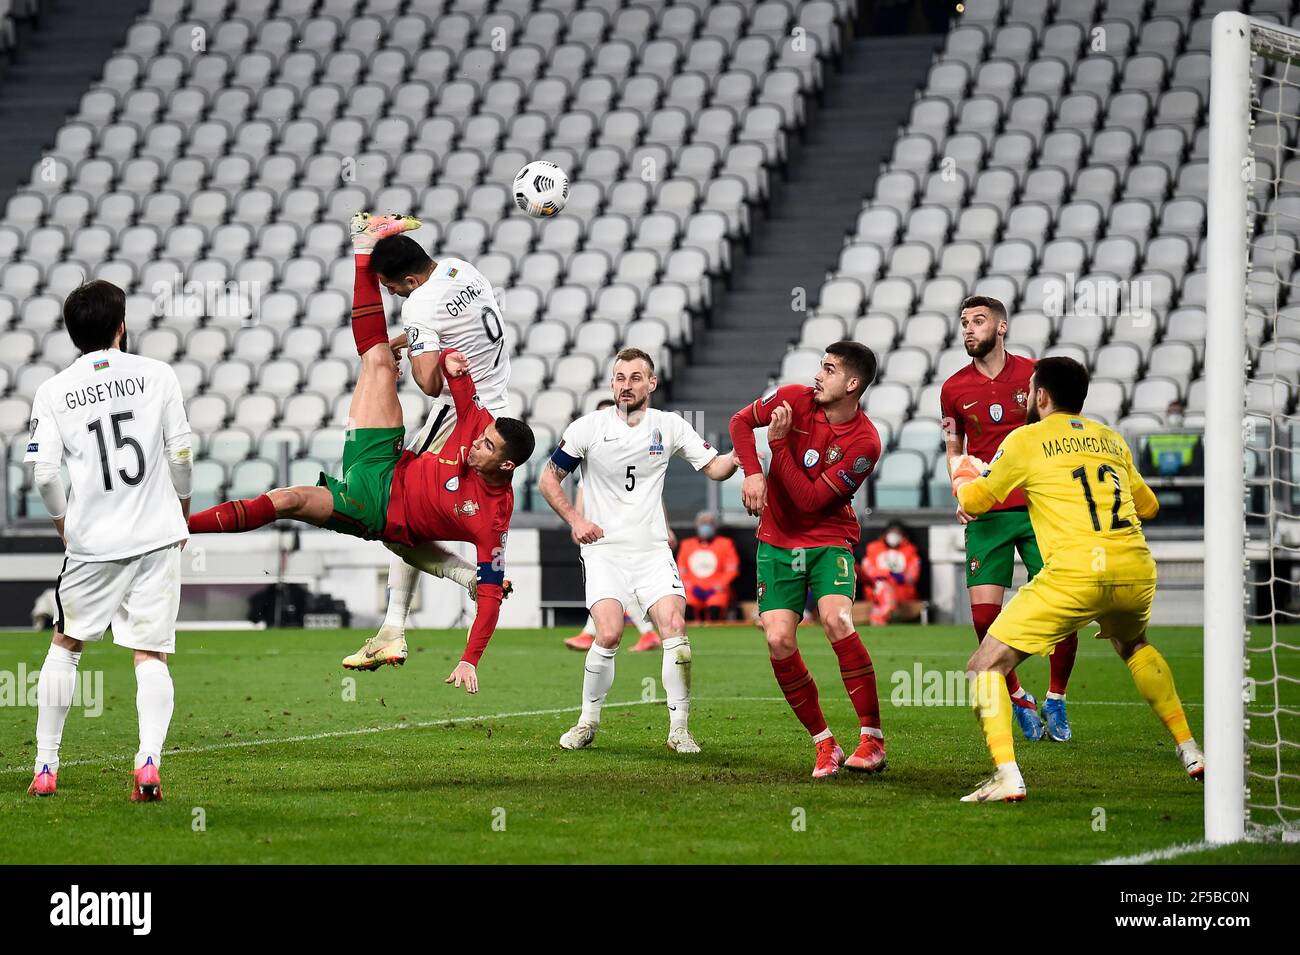 Turin, Italy - 24 March, 2021: Cristiano Ronaldo (C) of Portugal attempts a bicycle kick during the FIFA World Cup 2022 Qatar qualifying football match between Portugal and Azerbaijan. Portugal face Azerbaijan at a neutral venue in Turin behind closed doors to prevent the spread of Covid-19 variants. Portugal won 1-0 over Azerbaijan. Credit: Nicolò Campo/Alamy Live News Stock Photo